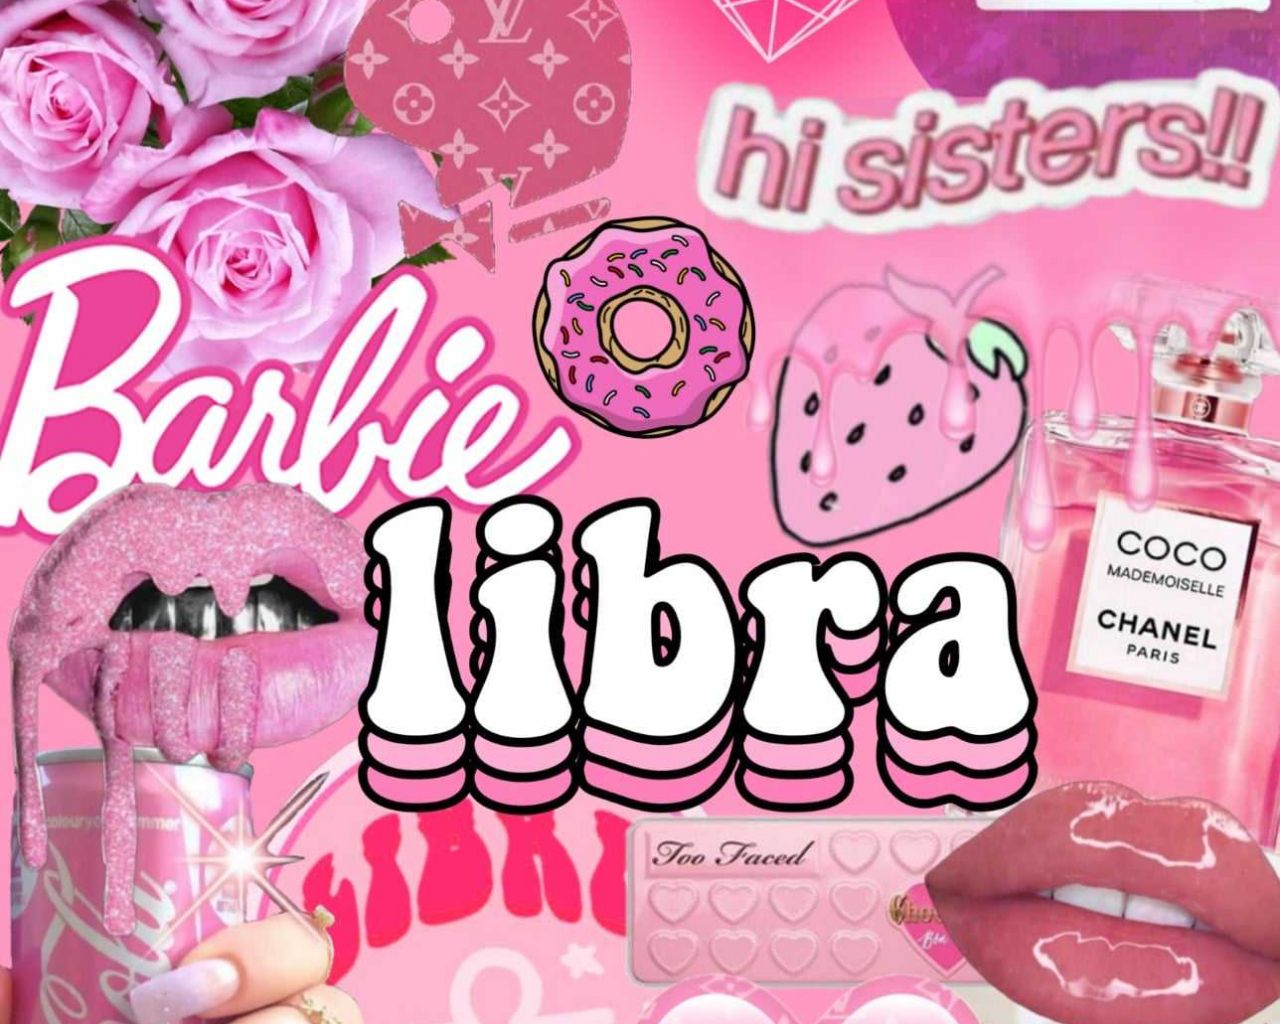 A picture of barbie and her friends - Libra